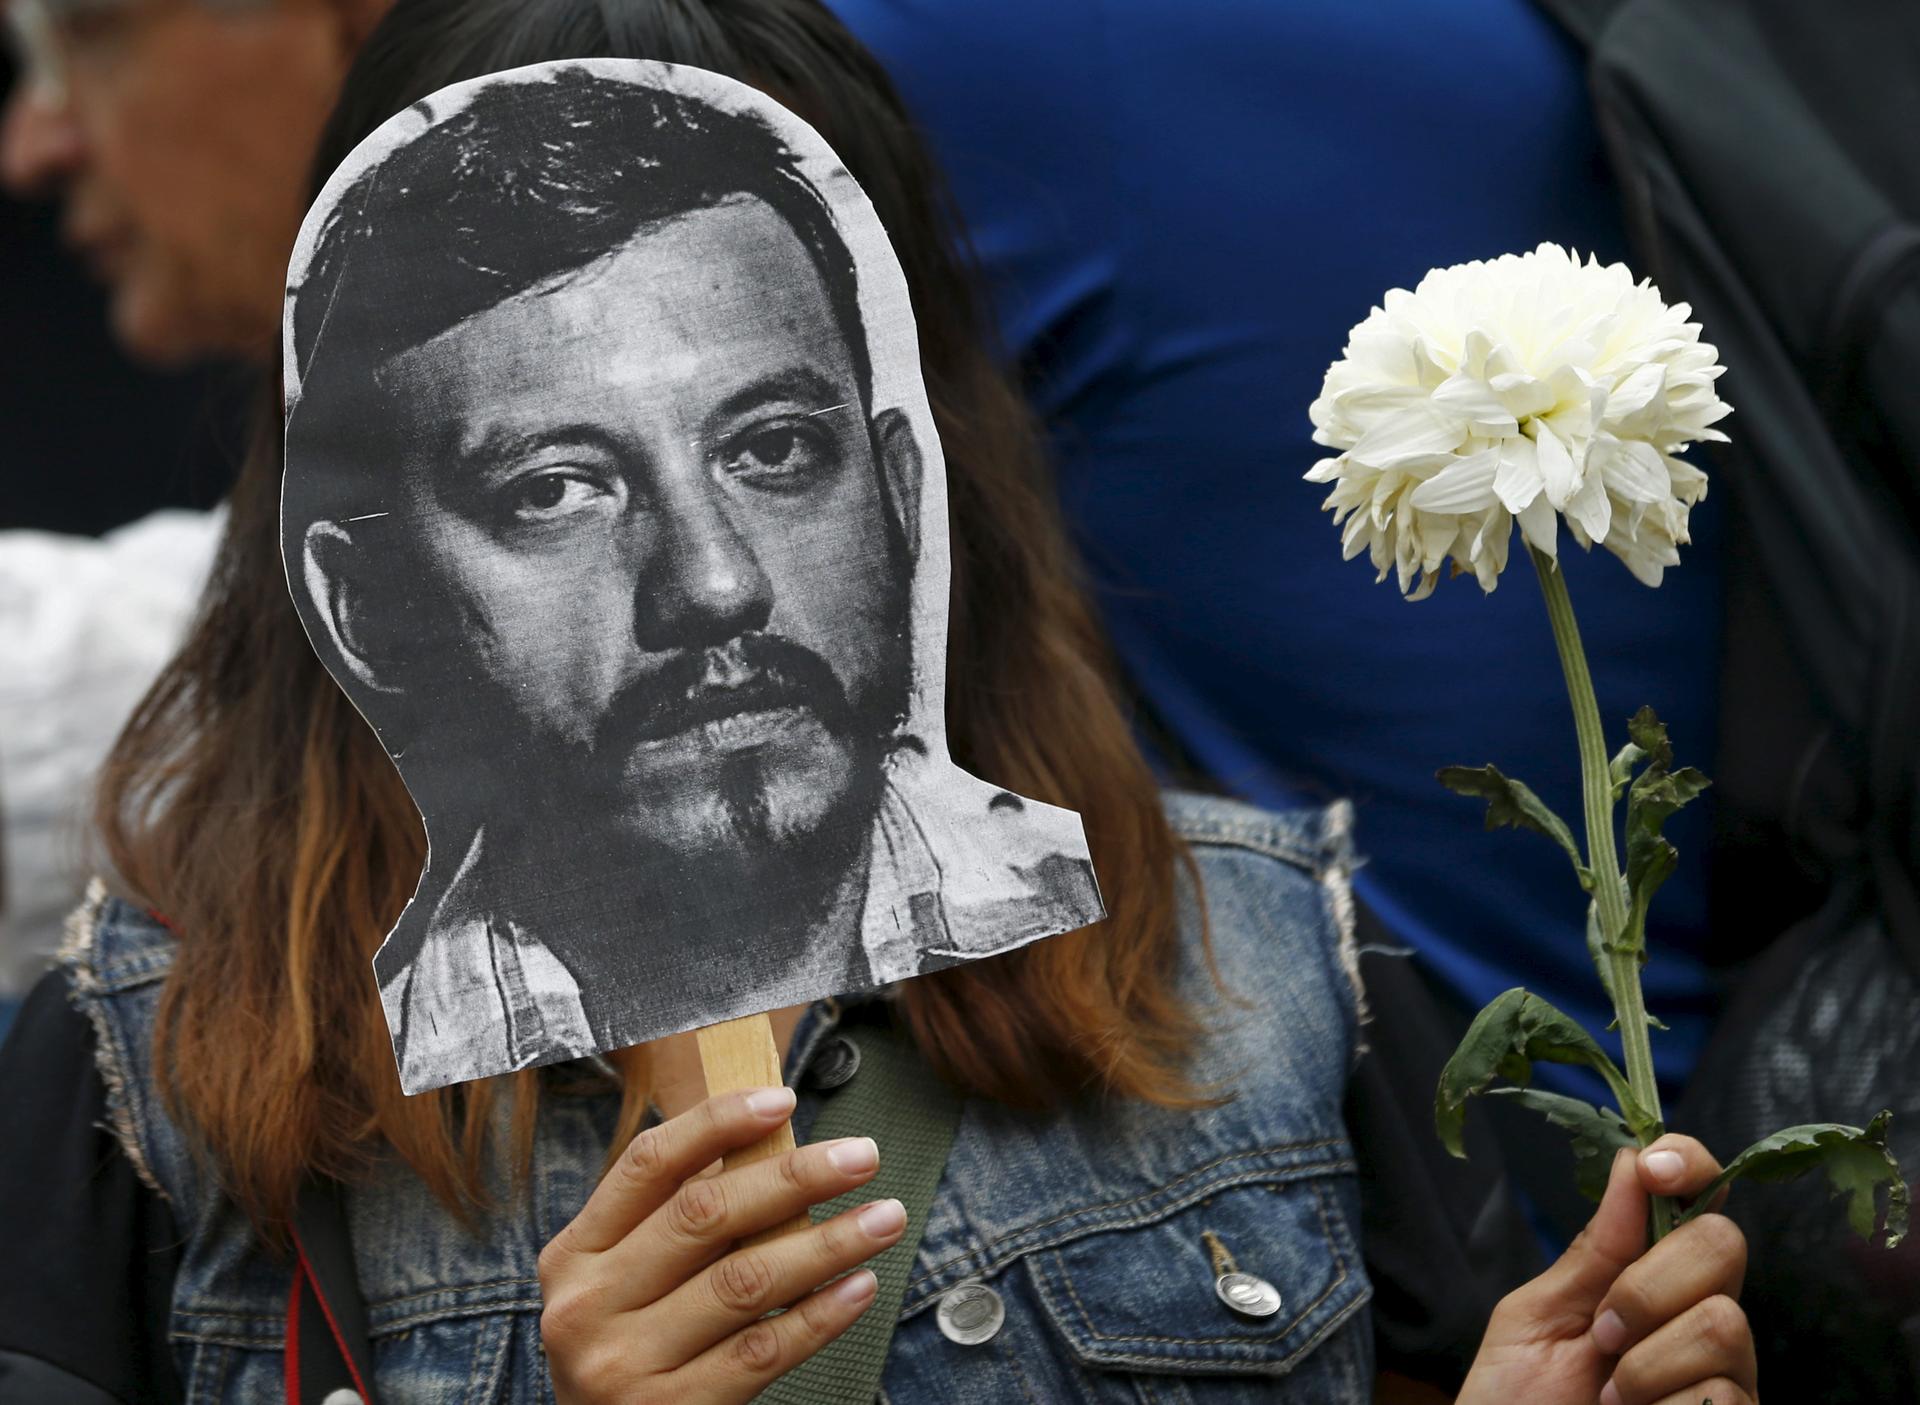 Outrage grows at slaying of Mexican journalist